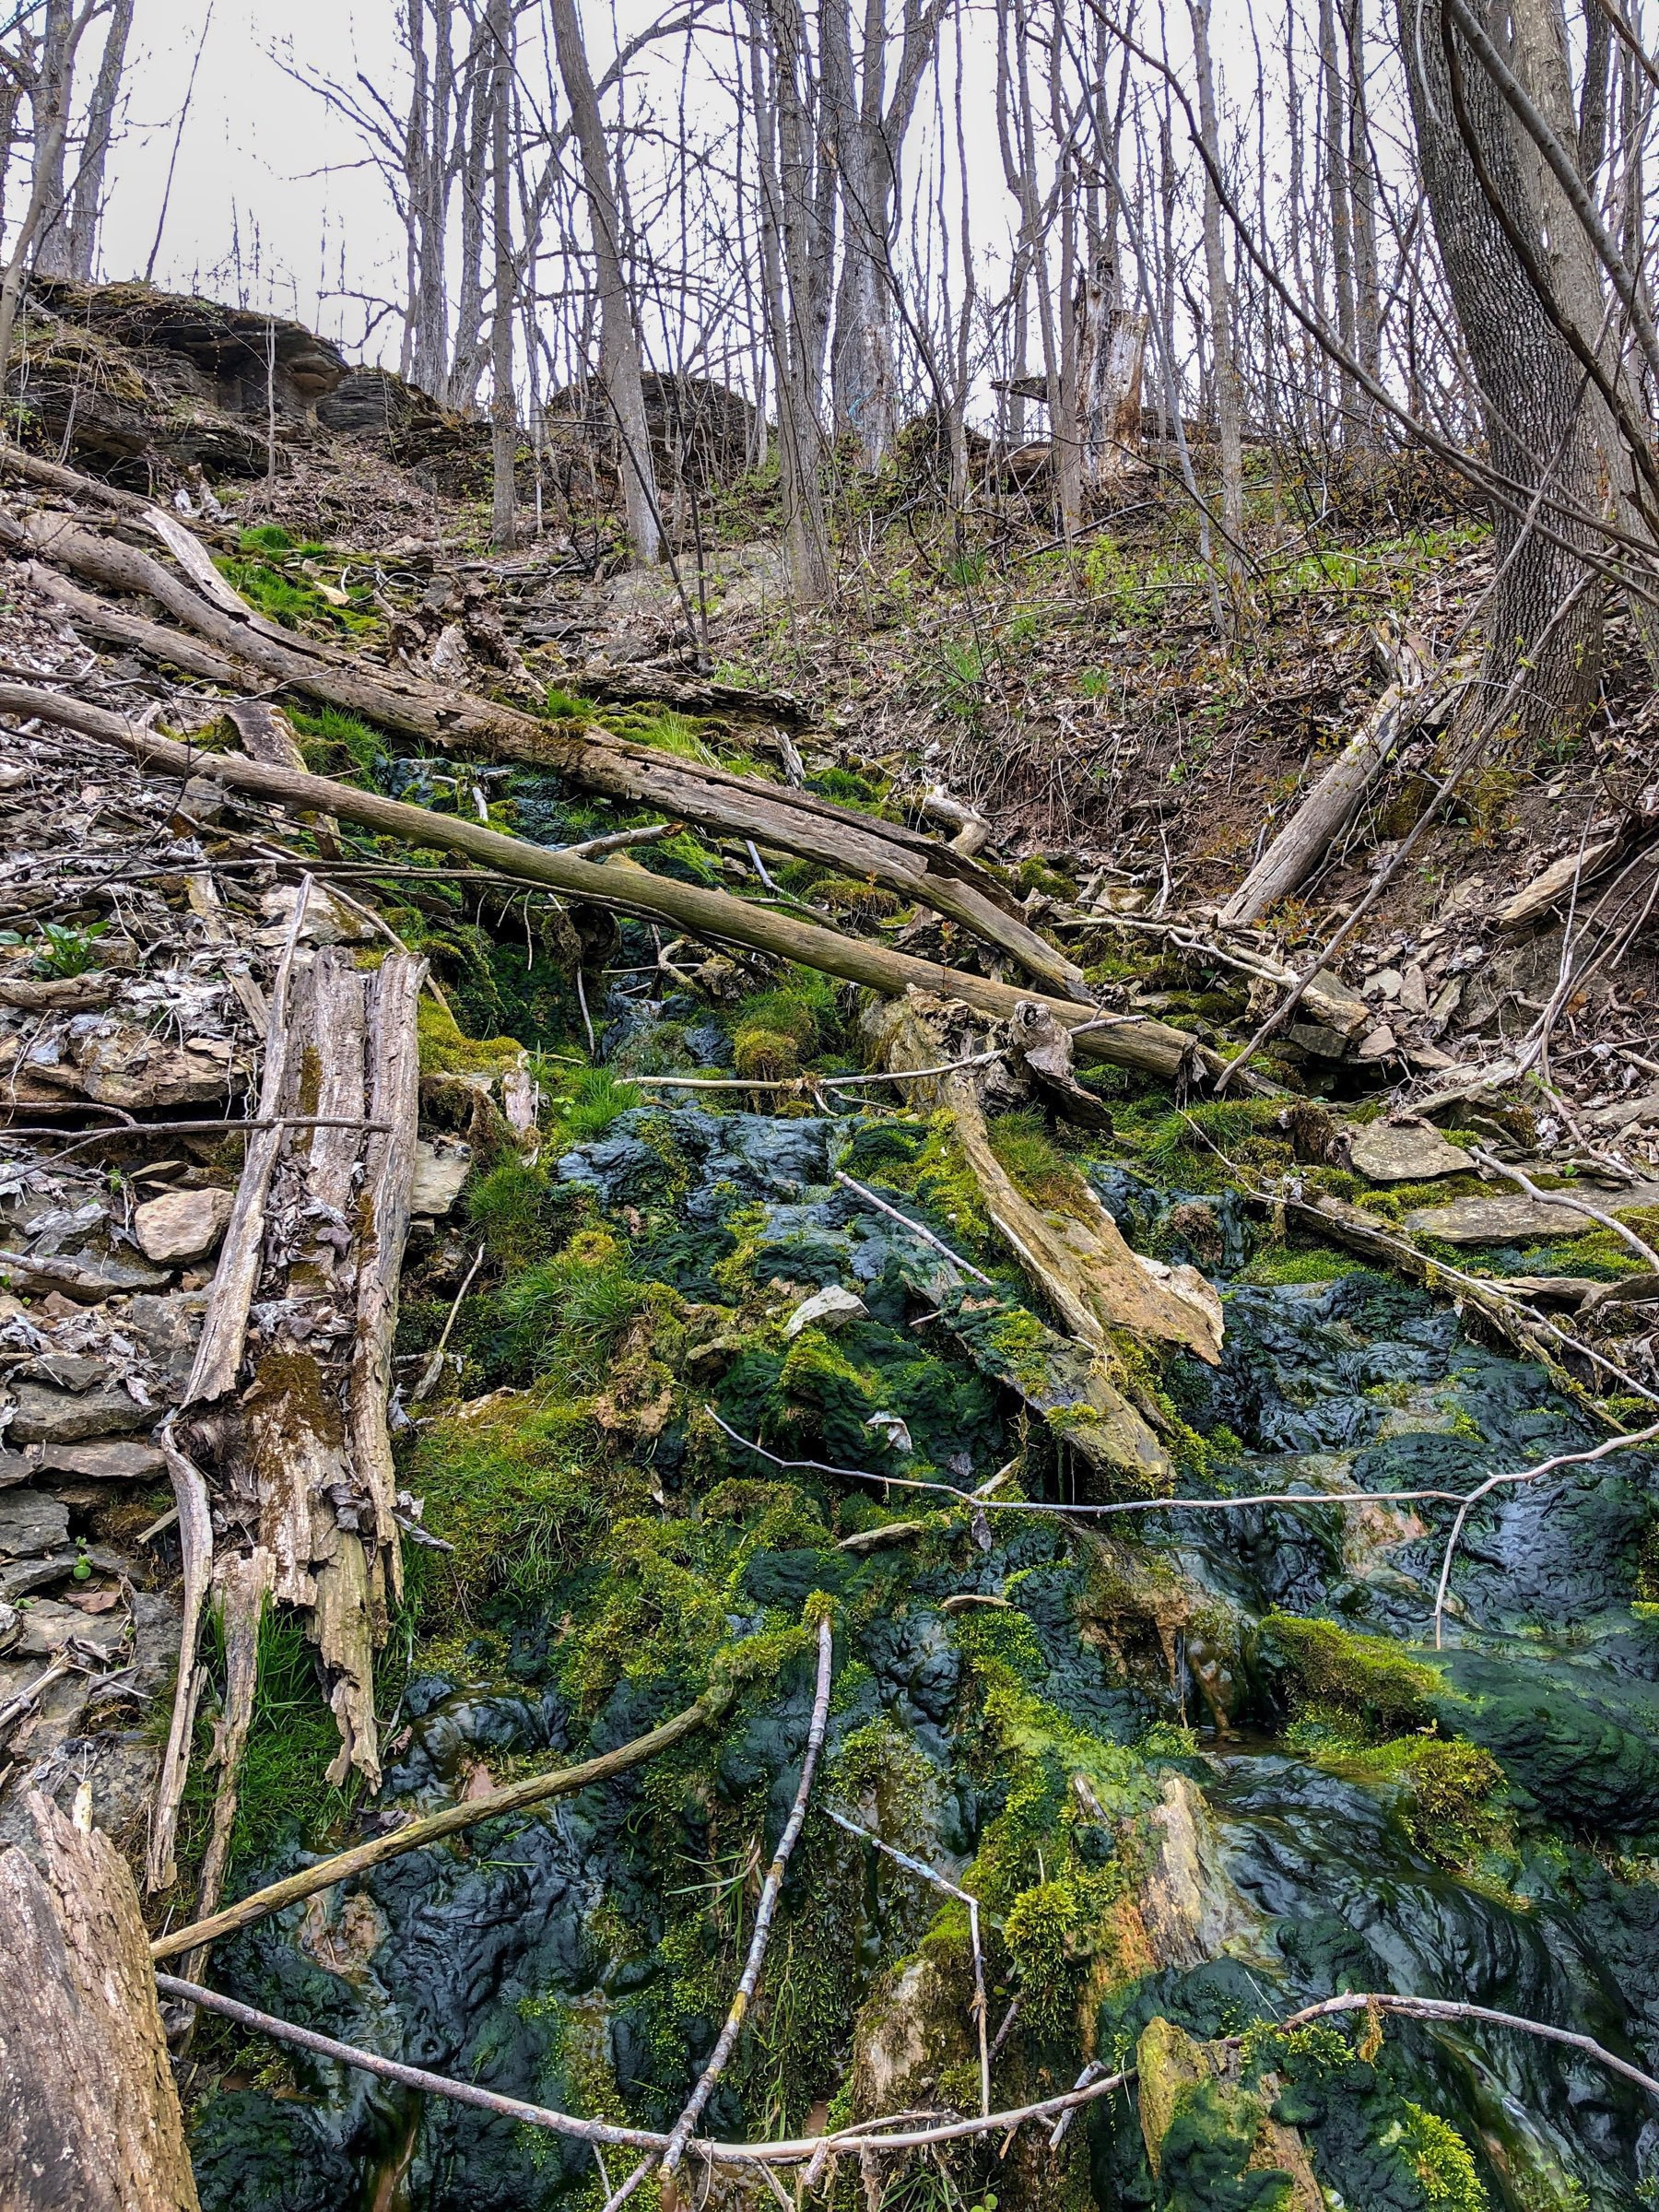 small, wooded stream with green plant growth and dark slimy matter